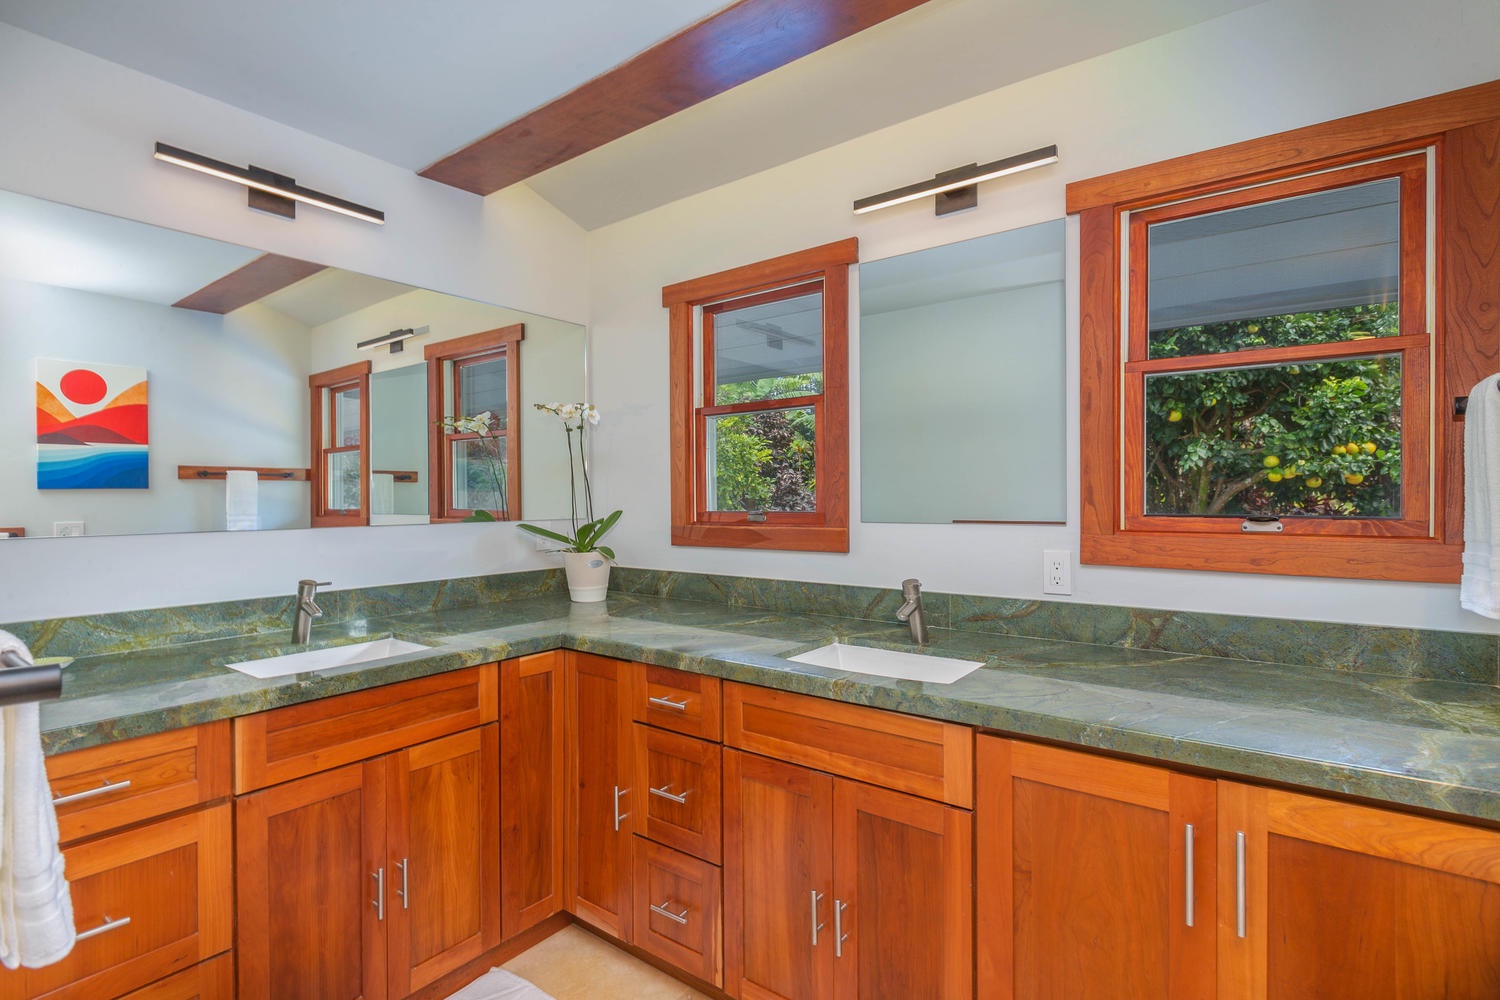 Princeville Vacation Rentals, Makana Lei - Dual sinks and plenty of counter space